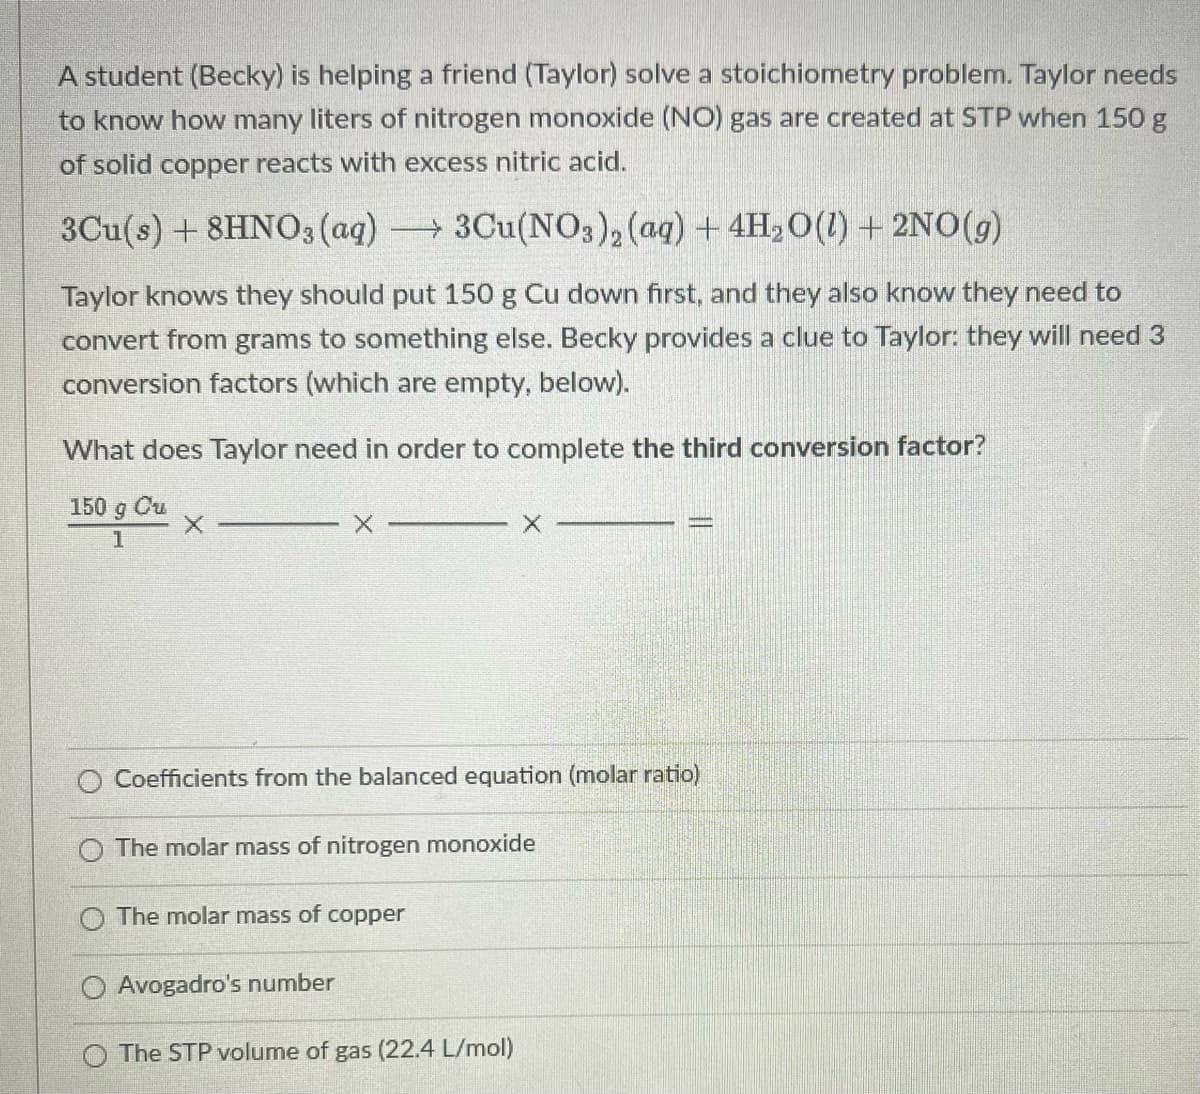 A student (Becky) is helping a friend (Taylor) solve a stoichiometry problem. Taylor needs
to know how many liters of nitrogen monoxide (NO) gas are created at STP when 150 g
of solid copper reacts with excess nitric acid.
3Cu(s) + 8HNO3 (aq) 3Cu(NO3), (ag) + 4H,0(1) + 2NO(g)
Taylor knows they should put 150 g Cu down first, and they also know they need to
convert from grams to something else. Becky provides a clue to Taylor: they will need 3
conversion factors (which are empty, below).
What does Taylor need in order to complete the third conversion factor?
150 g Cu
1
Coefficients from the balanced equation (molar ratio)
The molar mass of nitrogen monoxide
O The molar mass of copper
Avogadro's number
The STP volume of gas (22.4 L/mol)
